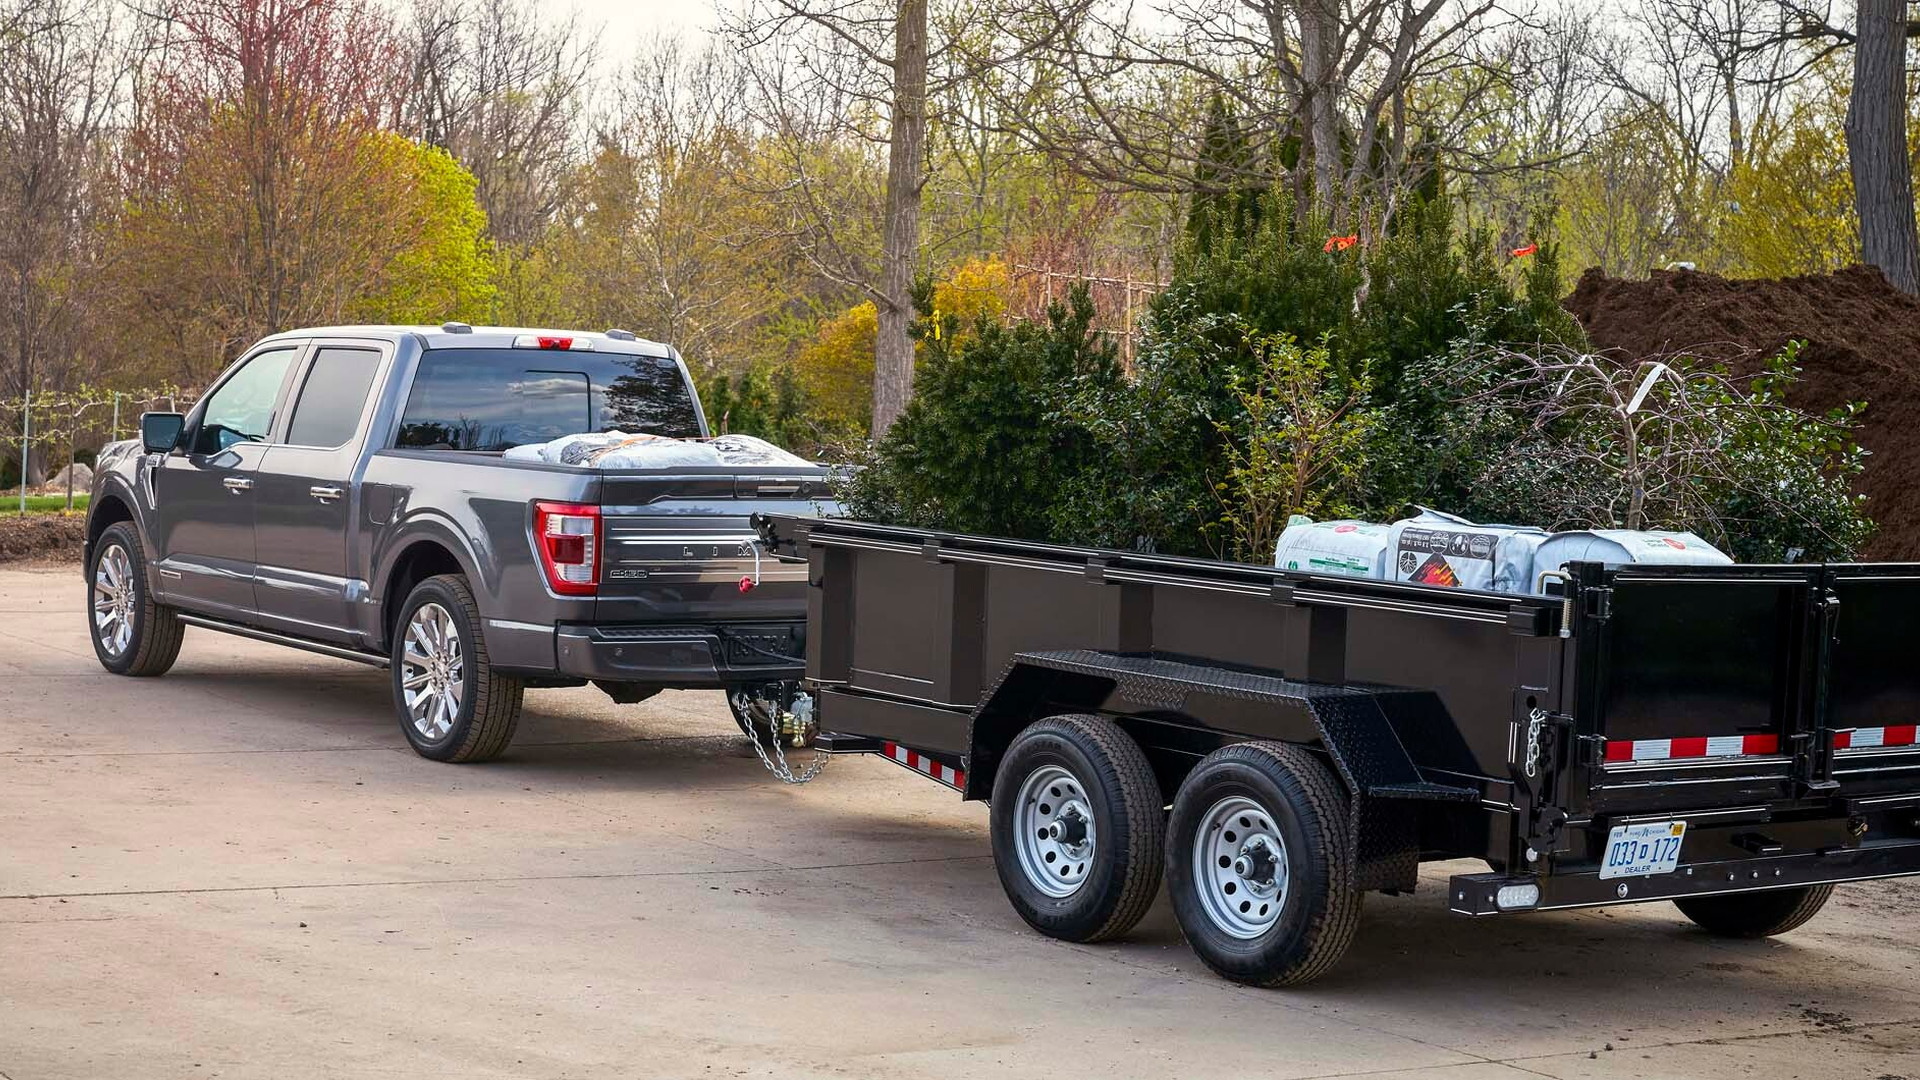 2021 Ford F-150 tow technology